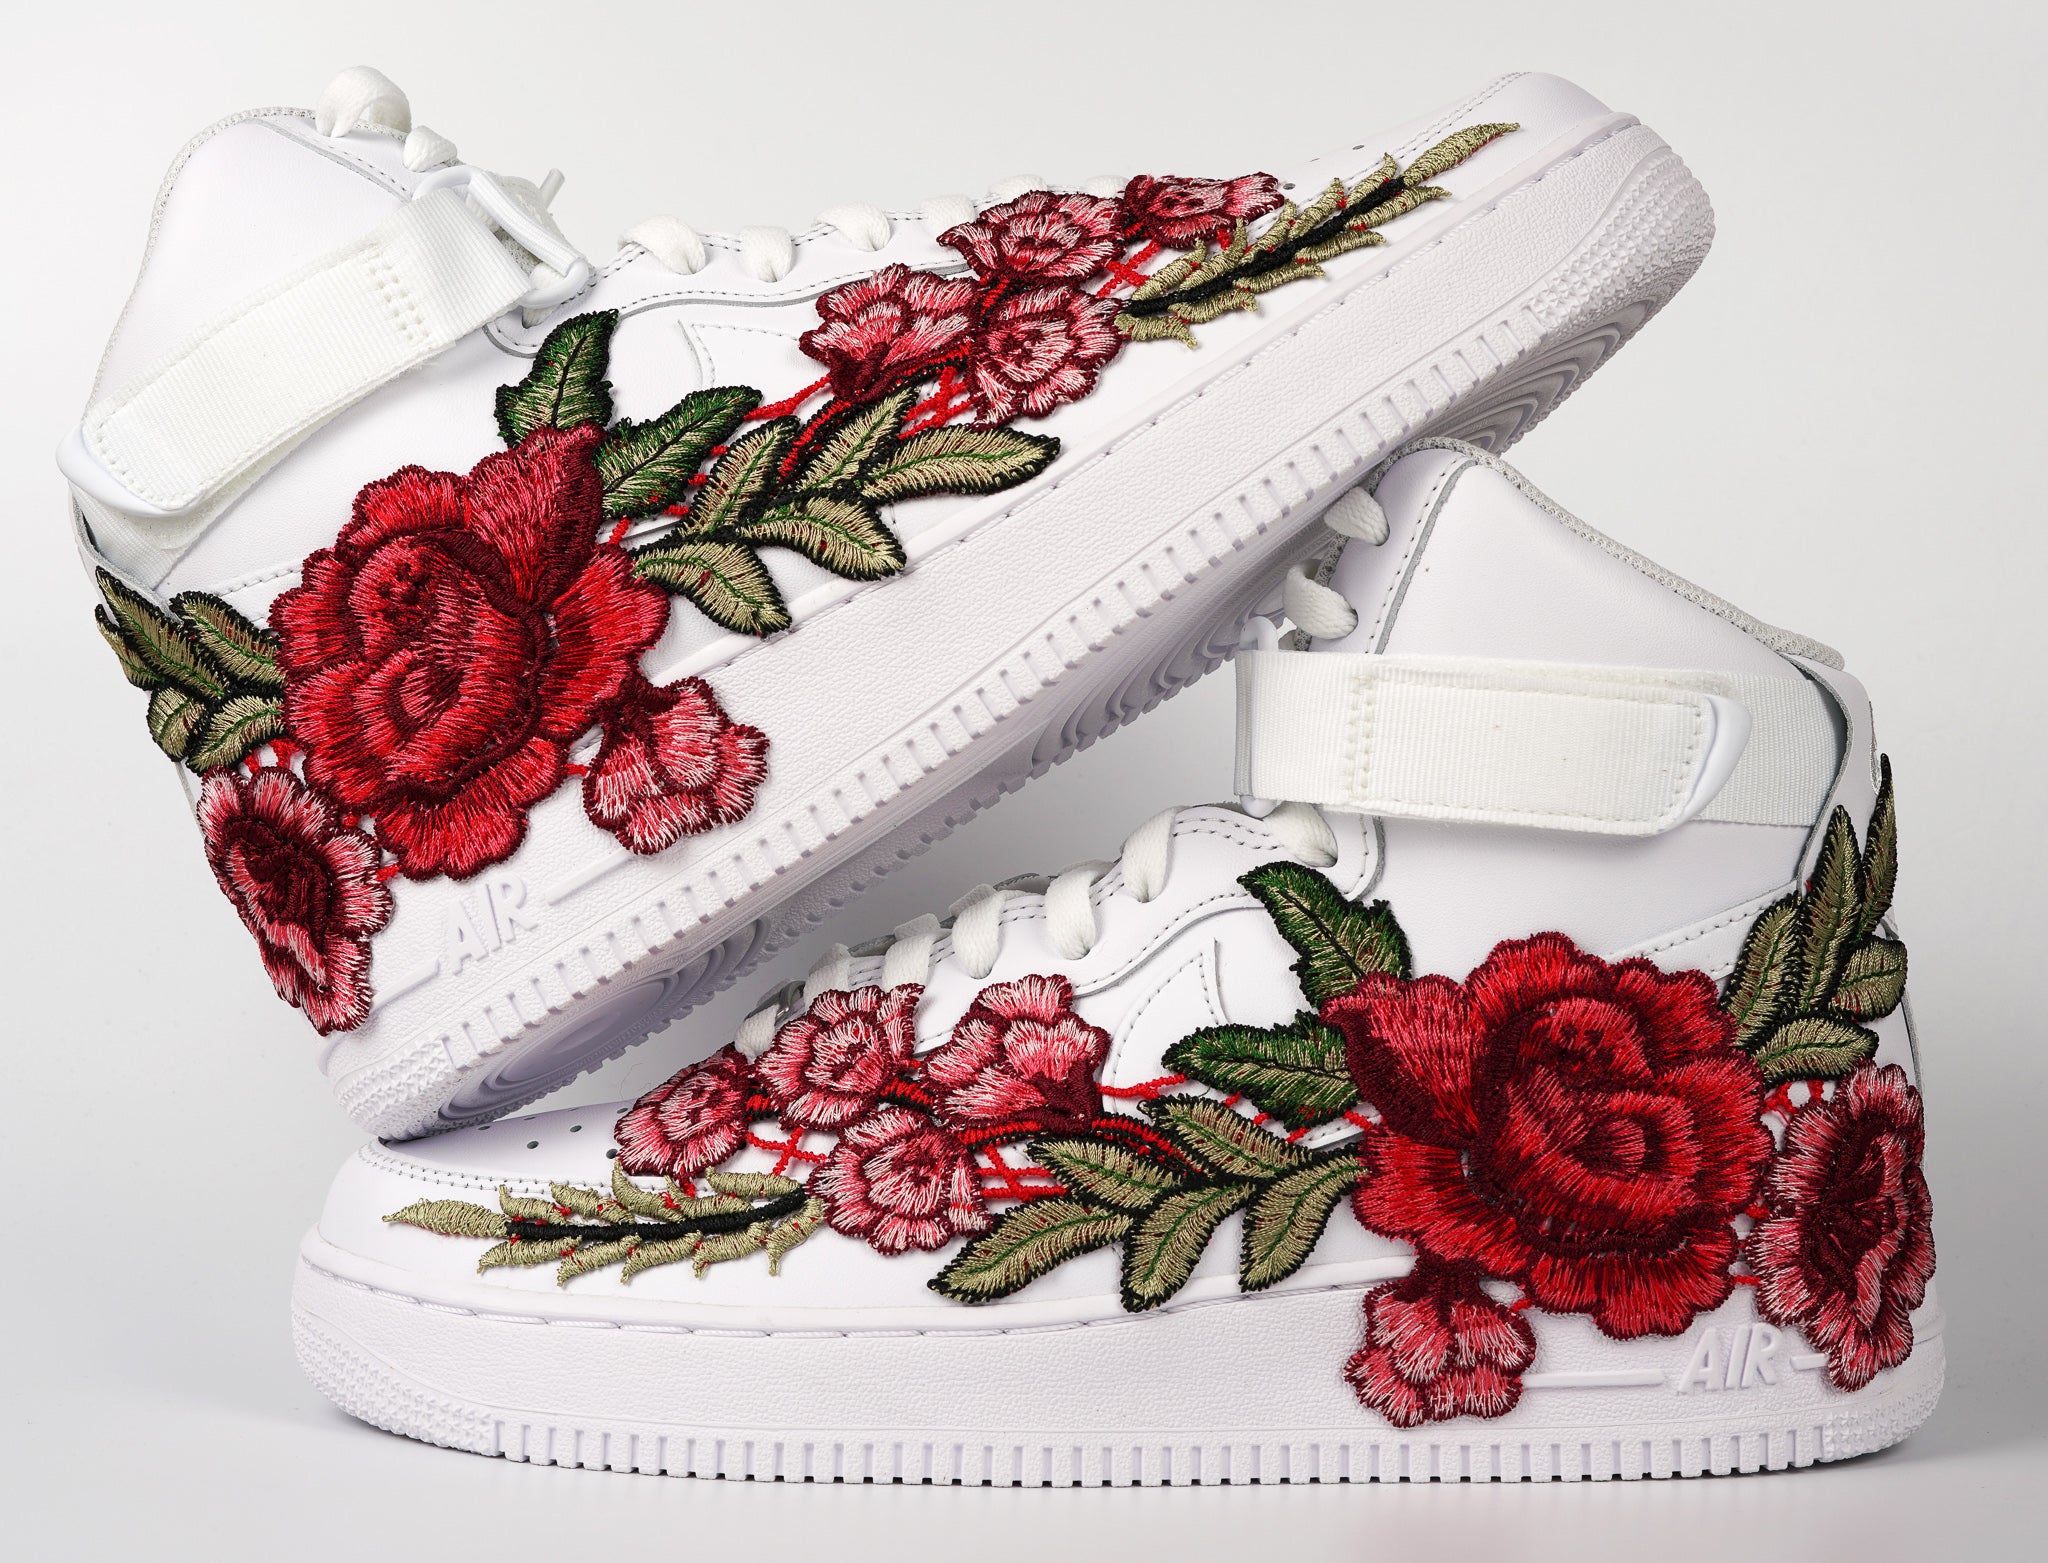 Nike Air Force 1 Custom Shoes High Red Rose Flower Floral White Men Women Kids All Sizes Stacked